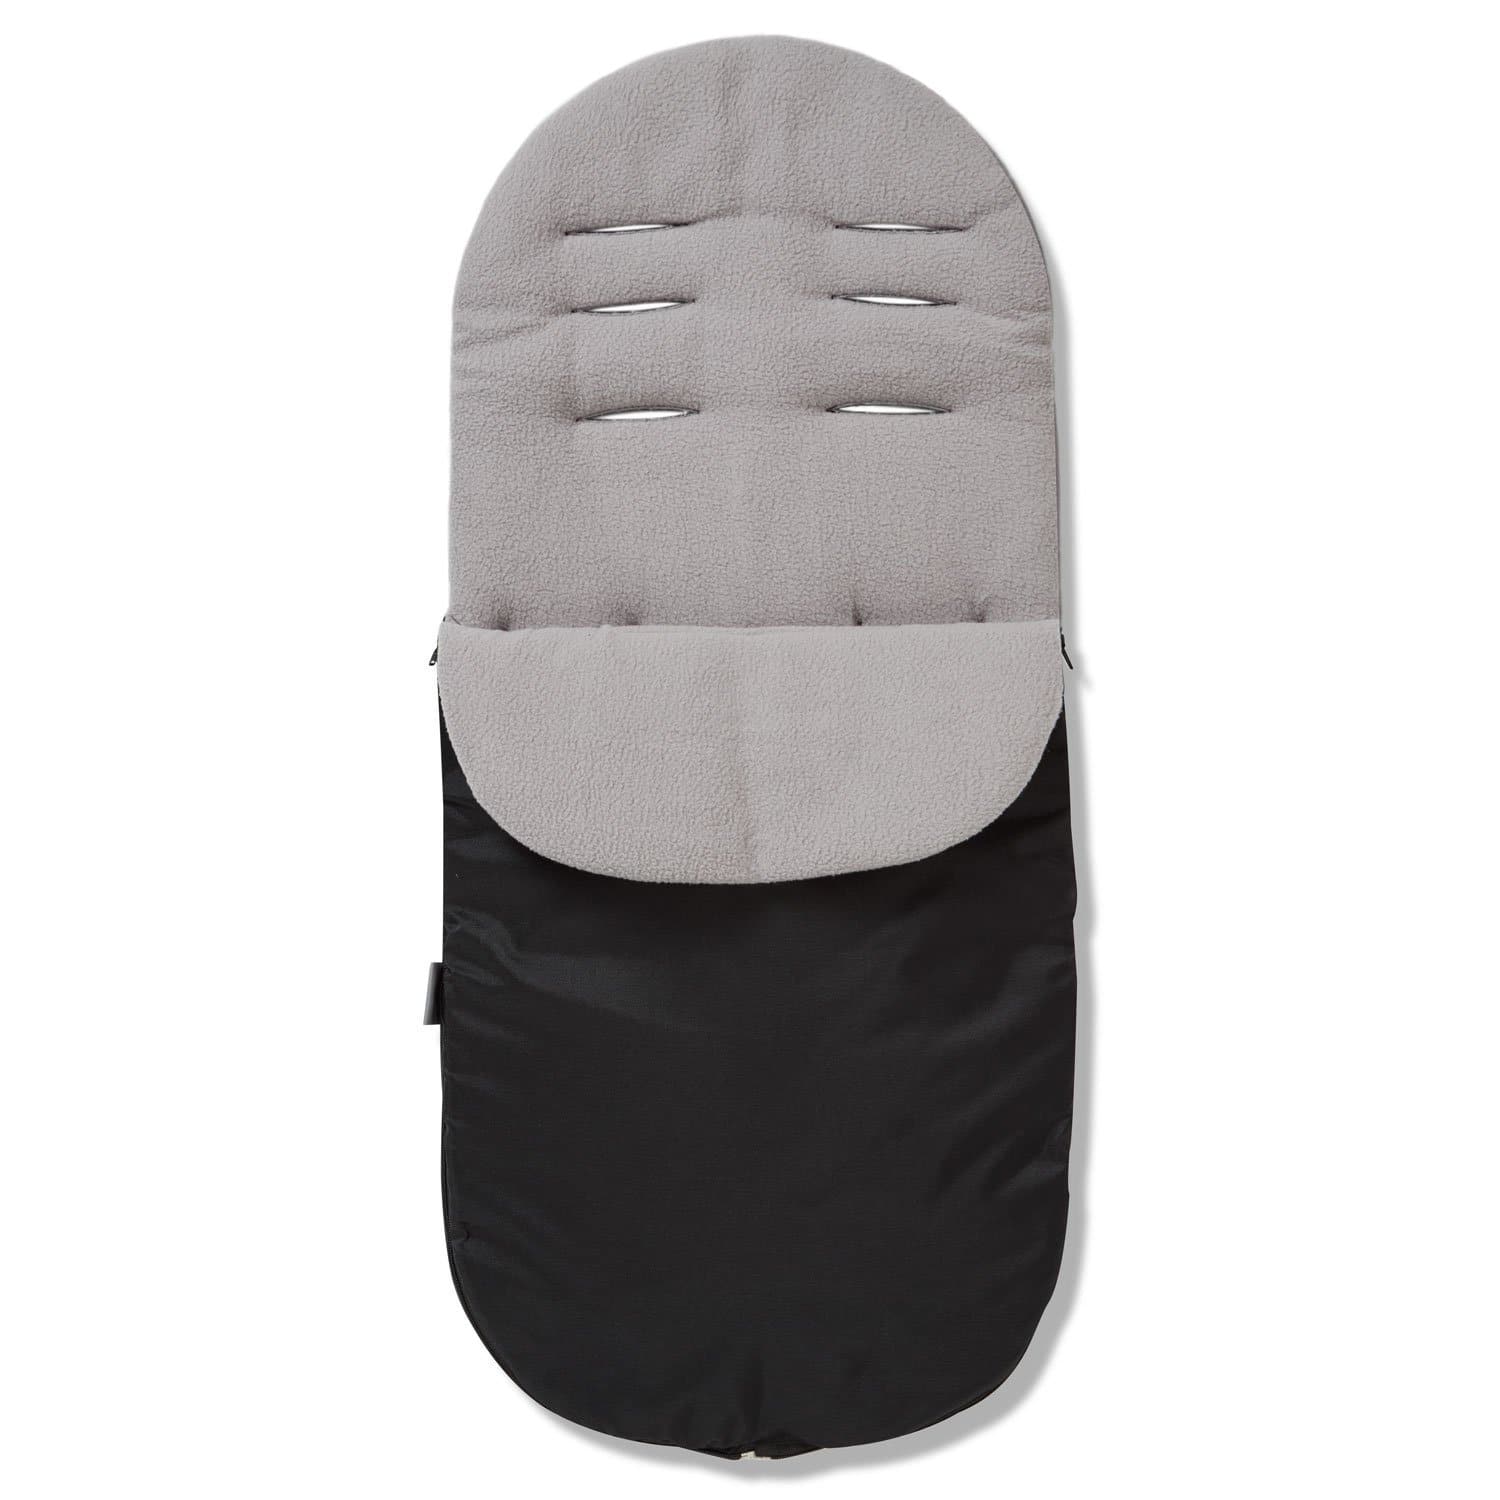 Footmuff / Cosy Toes Compatible with Safety 1st - Grey / Fits All Models | For Your Little One